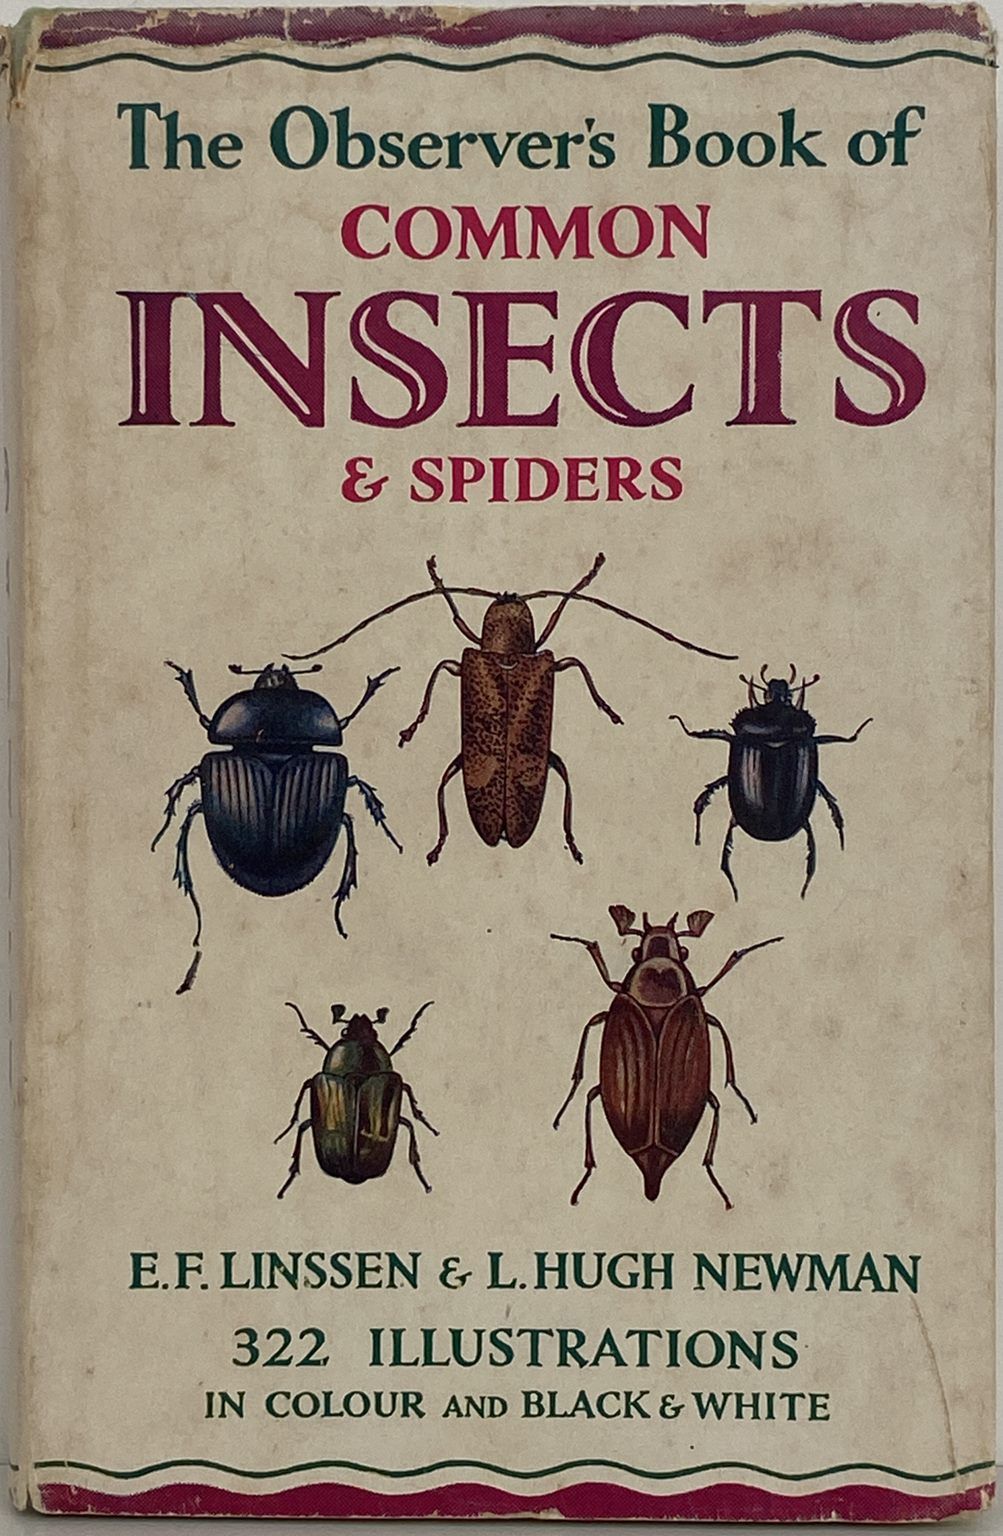 The Observer's Book of COMMON INSECTS & SPIDERS